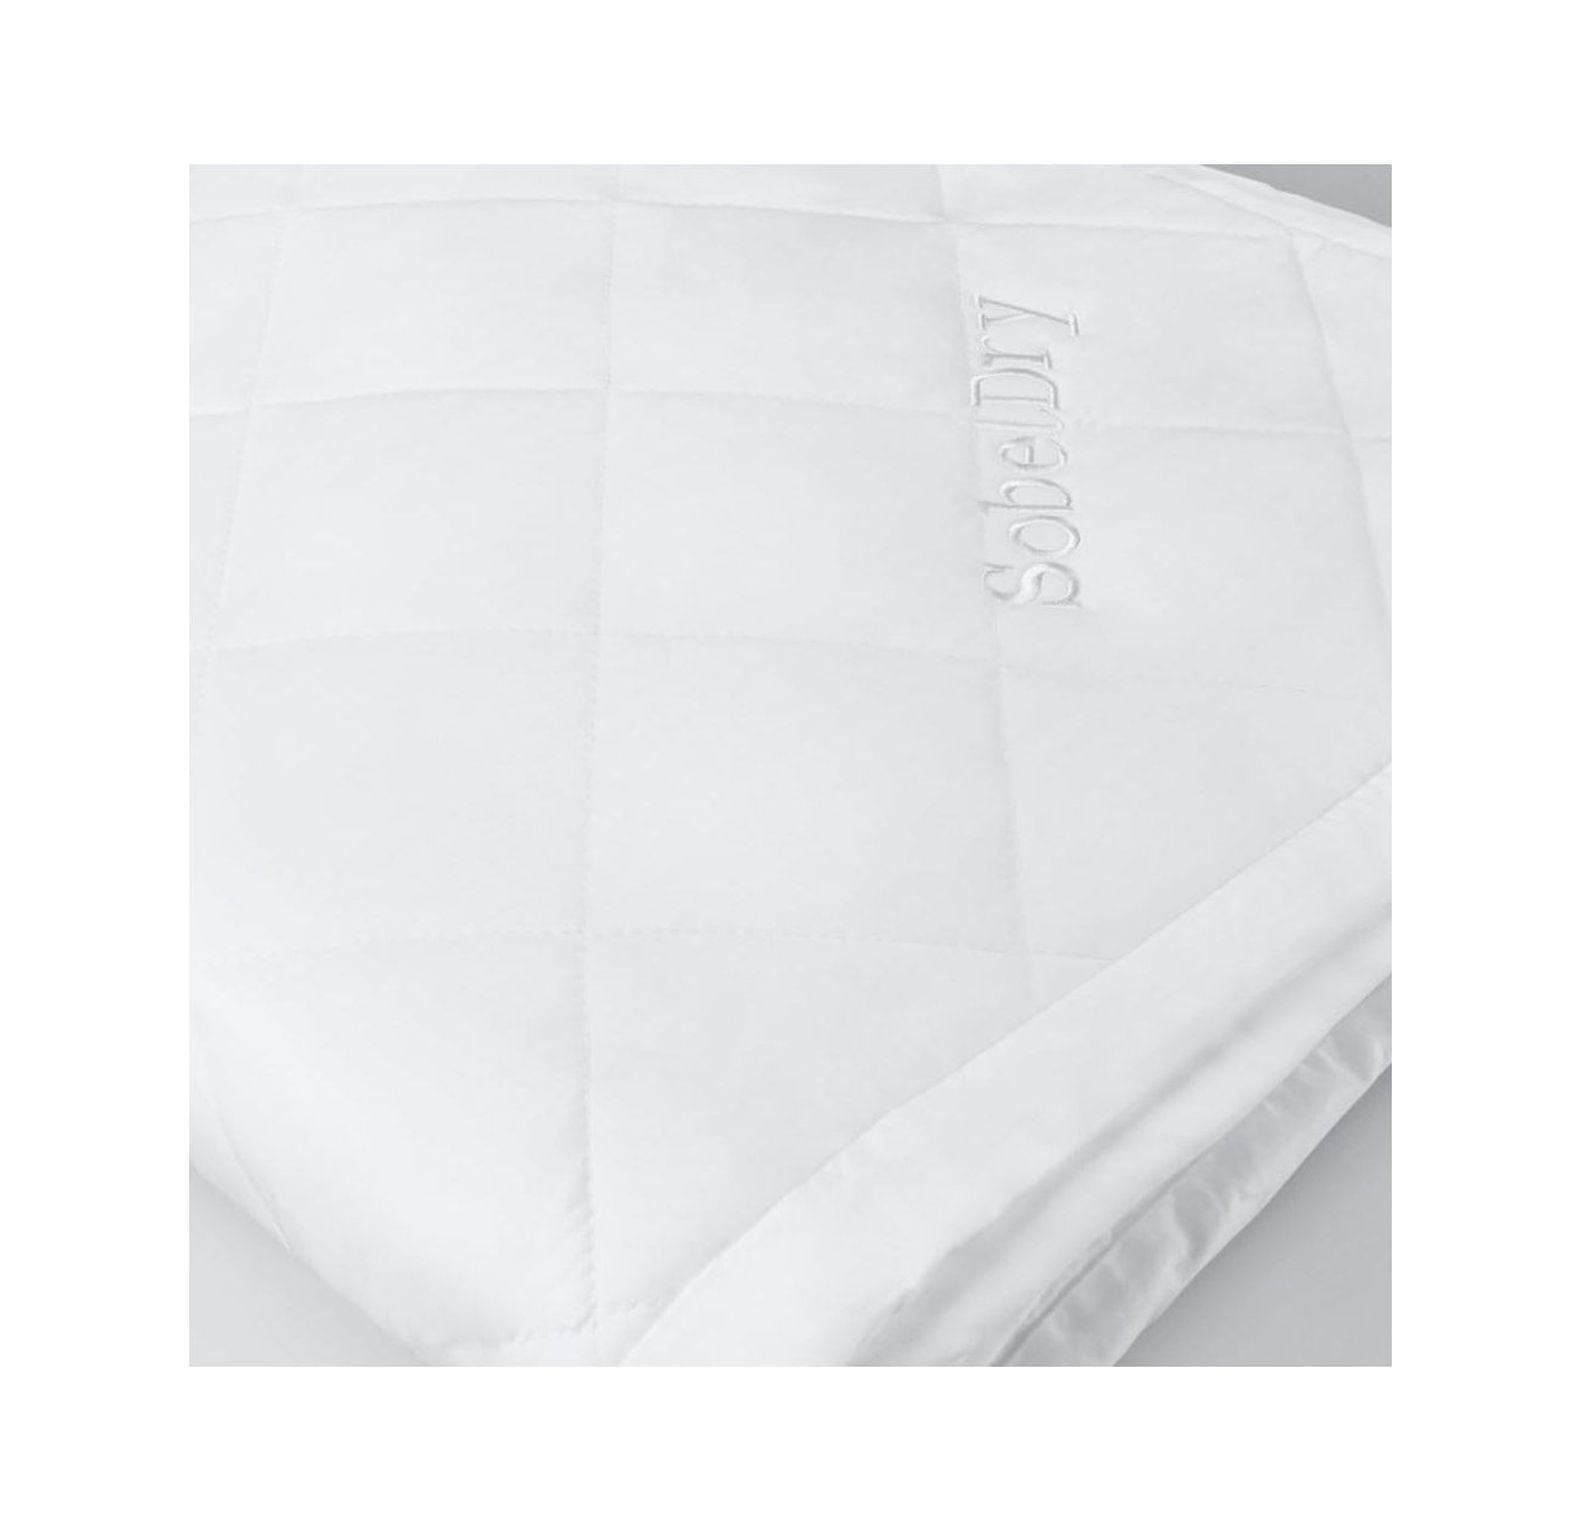 CodYinFI: Hotel Sobel Dry Hypoallergenic Mattress Pad, Hotel & Resort  Quality, 100% Water Resistant, Quiet, Soft & Supportive Microfiber Fill